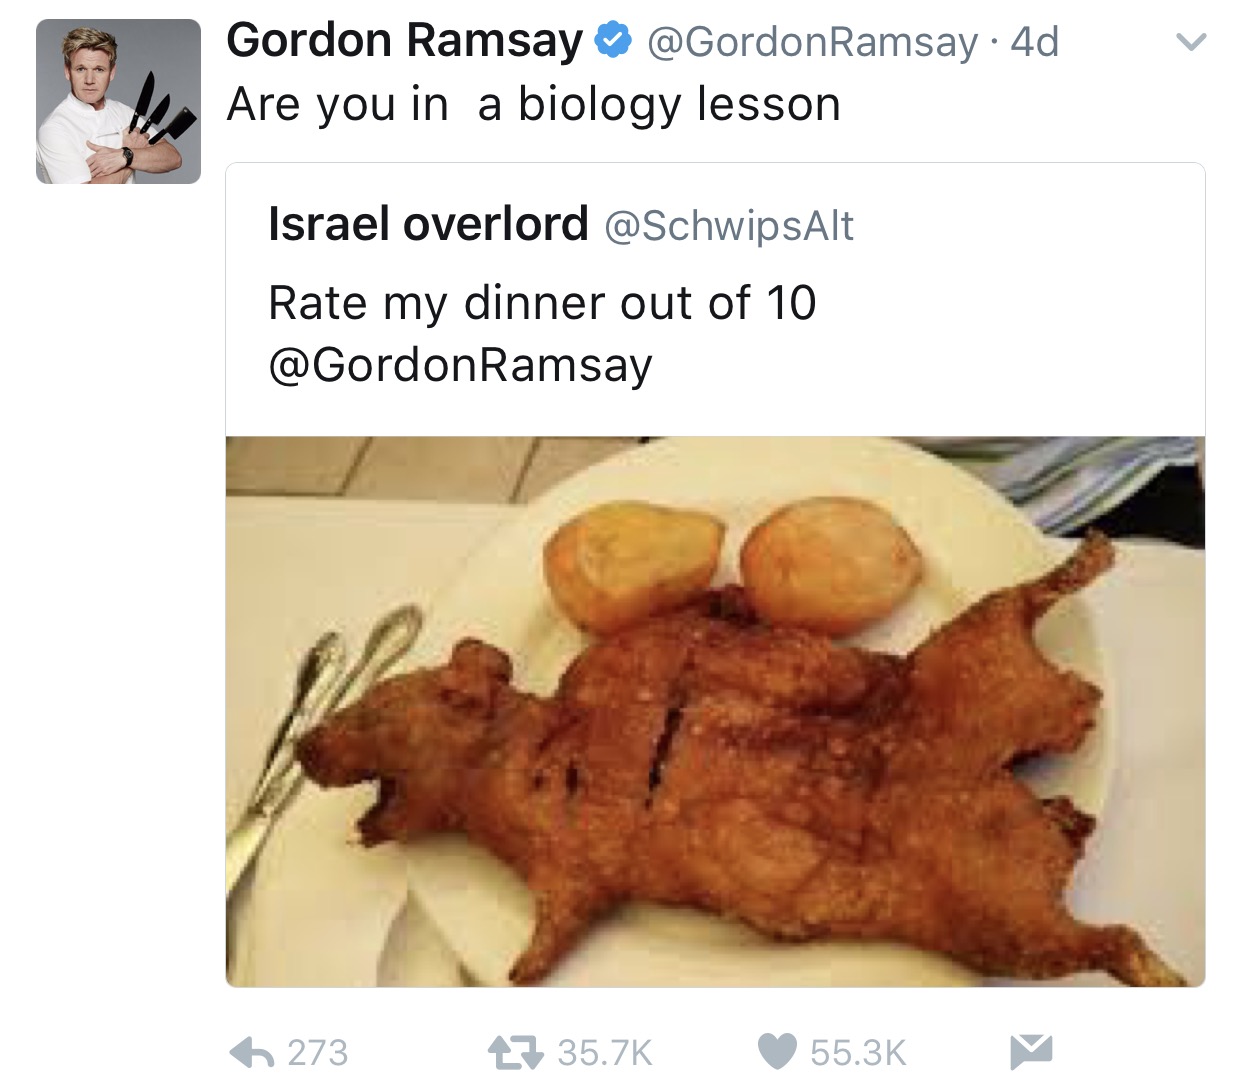 tweet - weird deep fried foods - Gordon Ramsay Ramsay 4d Are you in a biology lesson Israel overlord Rate my dinner out of 10 Ramsay 6 273 27 V